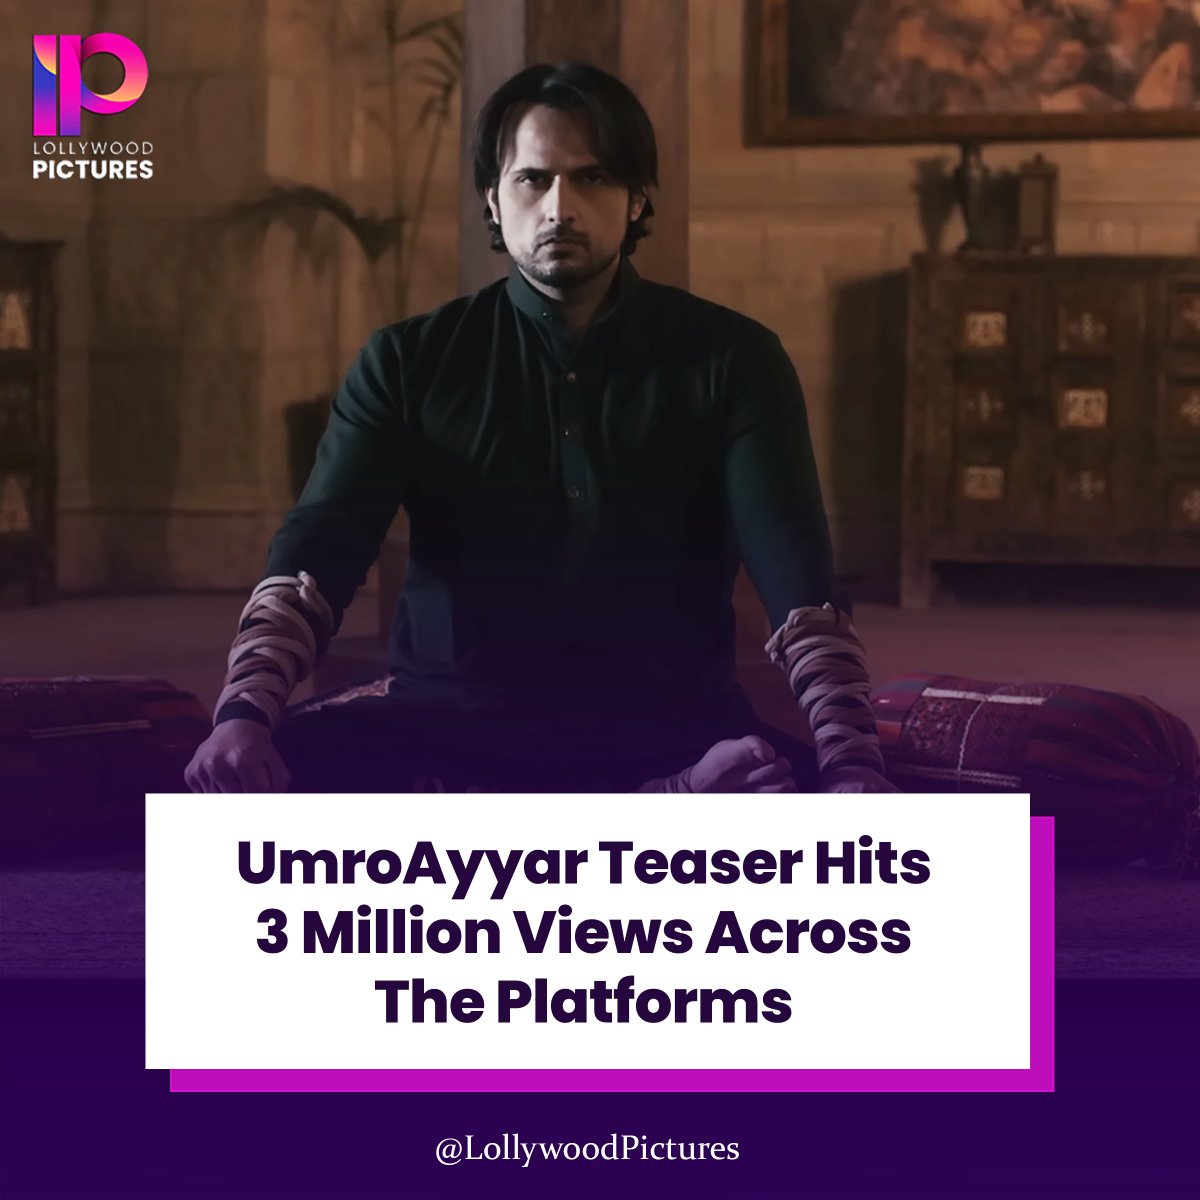 In addition to a thunderous response from netizens, UmroAyyar's official teaser received a lot of praise from critics as well. As of now, the Official Teaser has crossed 3 million views across social media platforms.

#UmroAyyarANewBeginning  #عمروعیار #LollywoodPictures